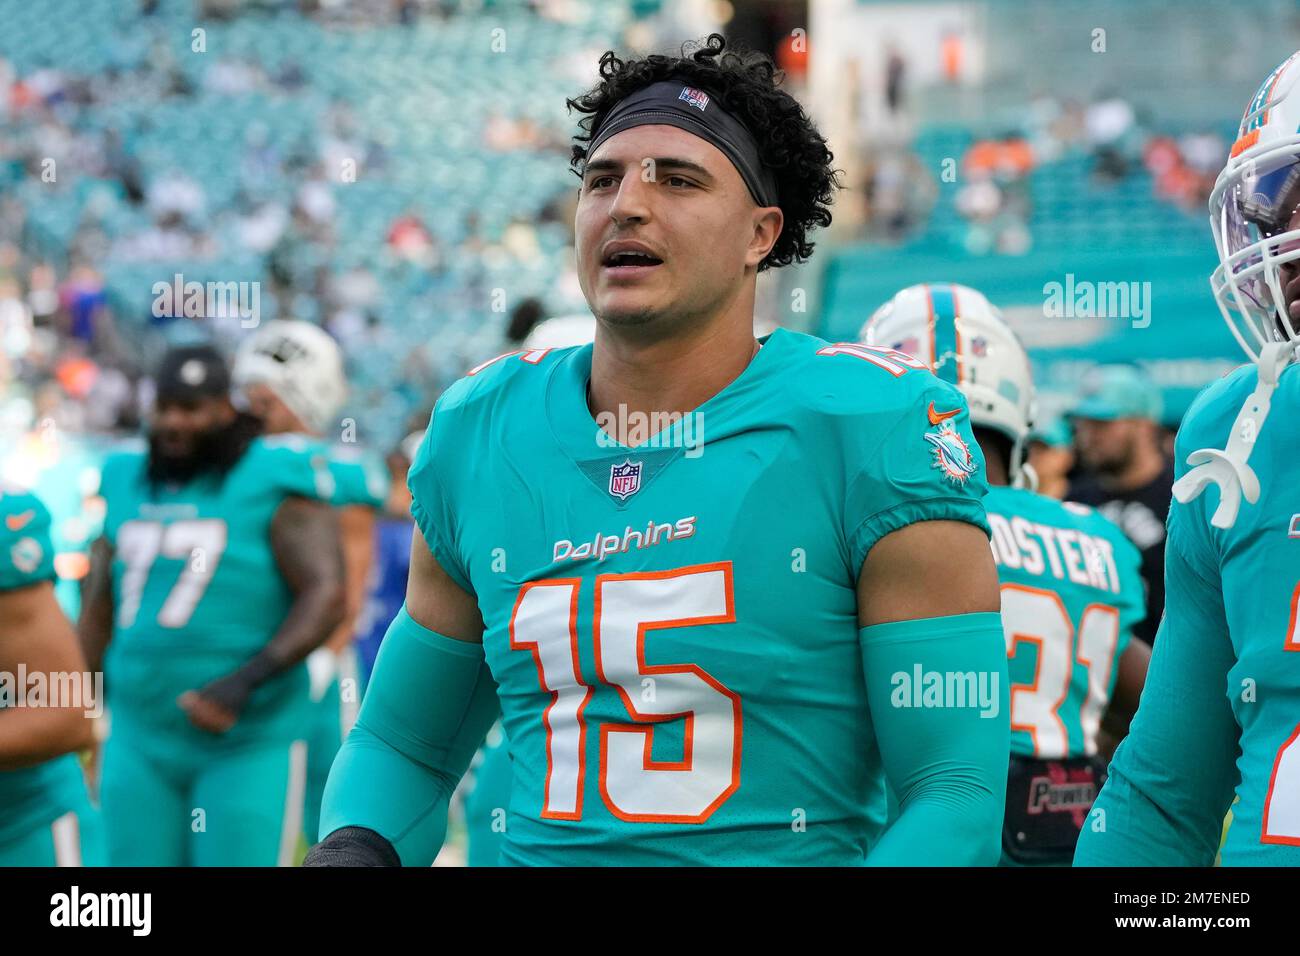 Miami Dolphins' Jaelan Phillips on his way to becoming NFL's next